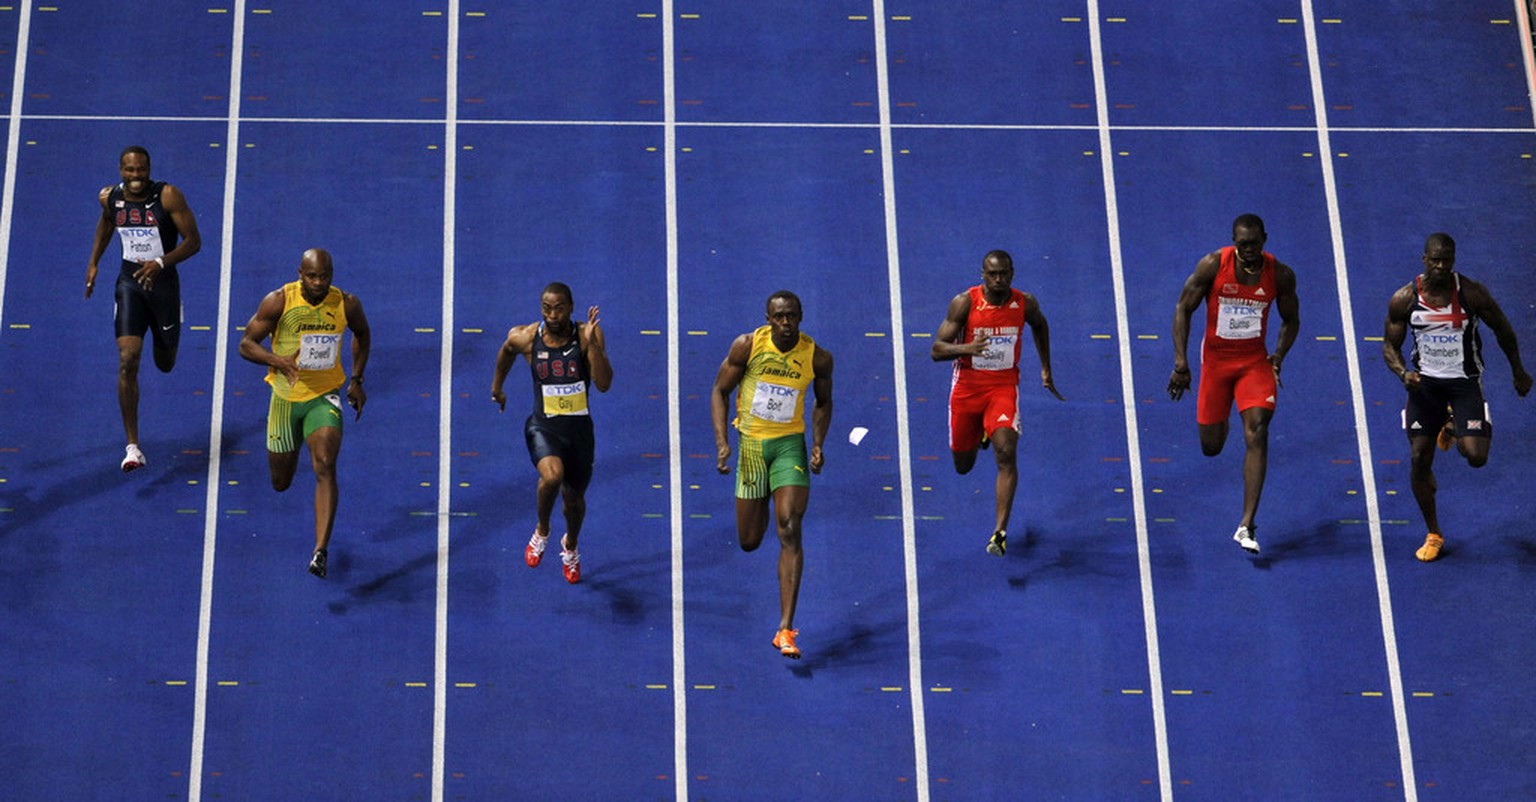 Jamaica&#039;s Usain Bolt, center, runs to setting a new Men&#039;s 100m World Record during the World Athletics Championships in Berlin on Sunday, Aug. 16, 2009. (AP Photo/Gero Breloer)